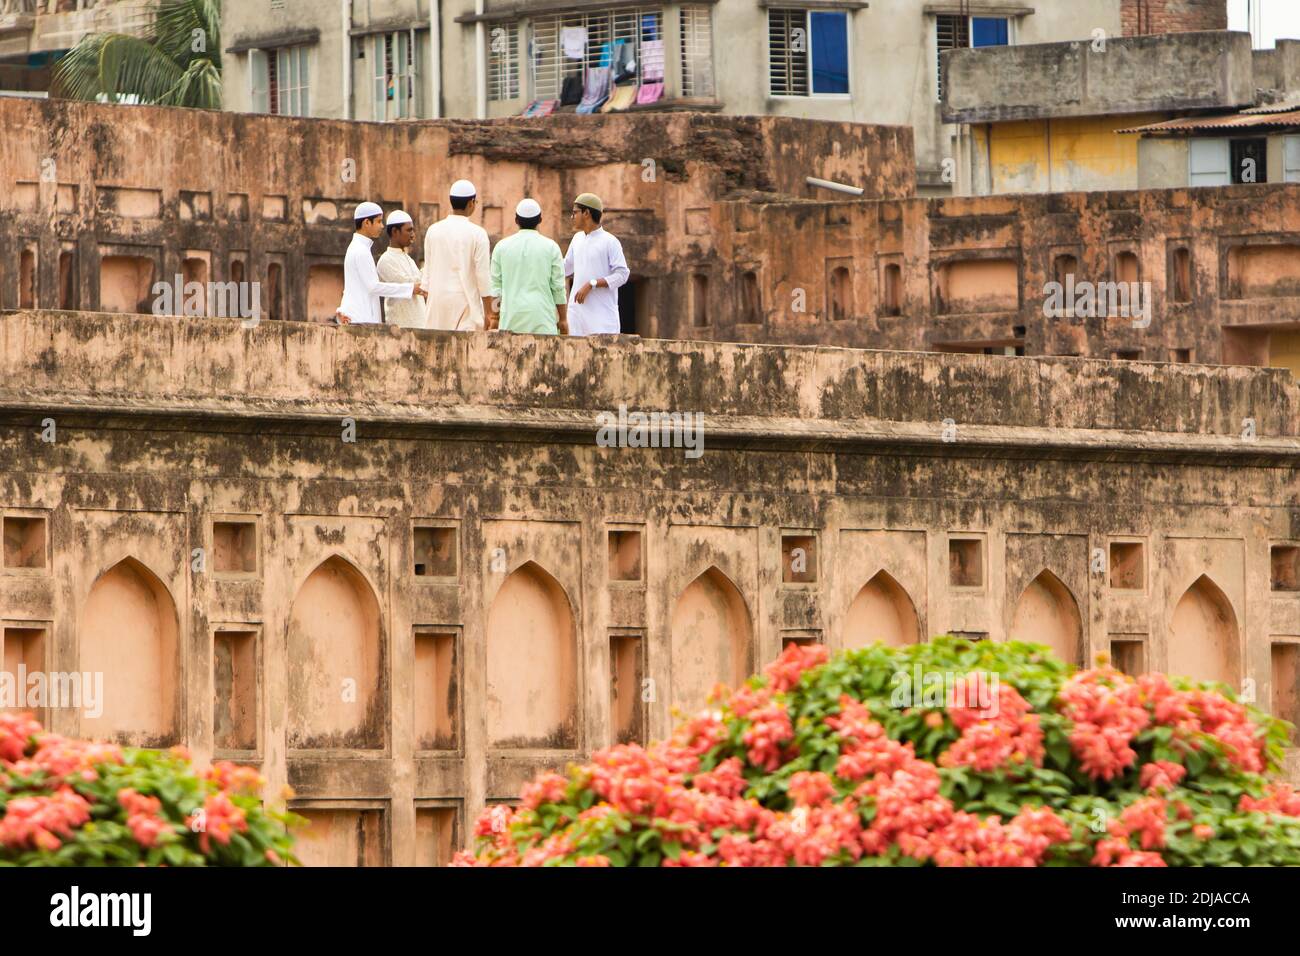 Dhaka, Bangladesh - October 30, 2018: a group of students lie on the top of the Lalbagh Fort's walls Stock Photo